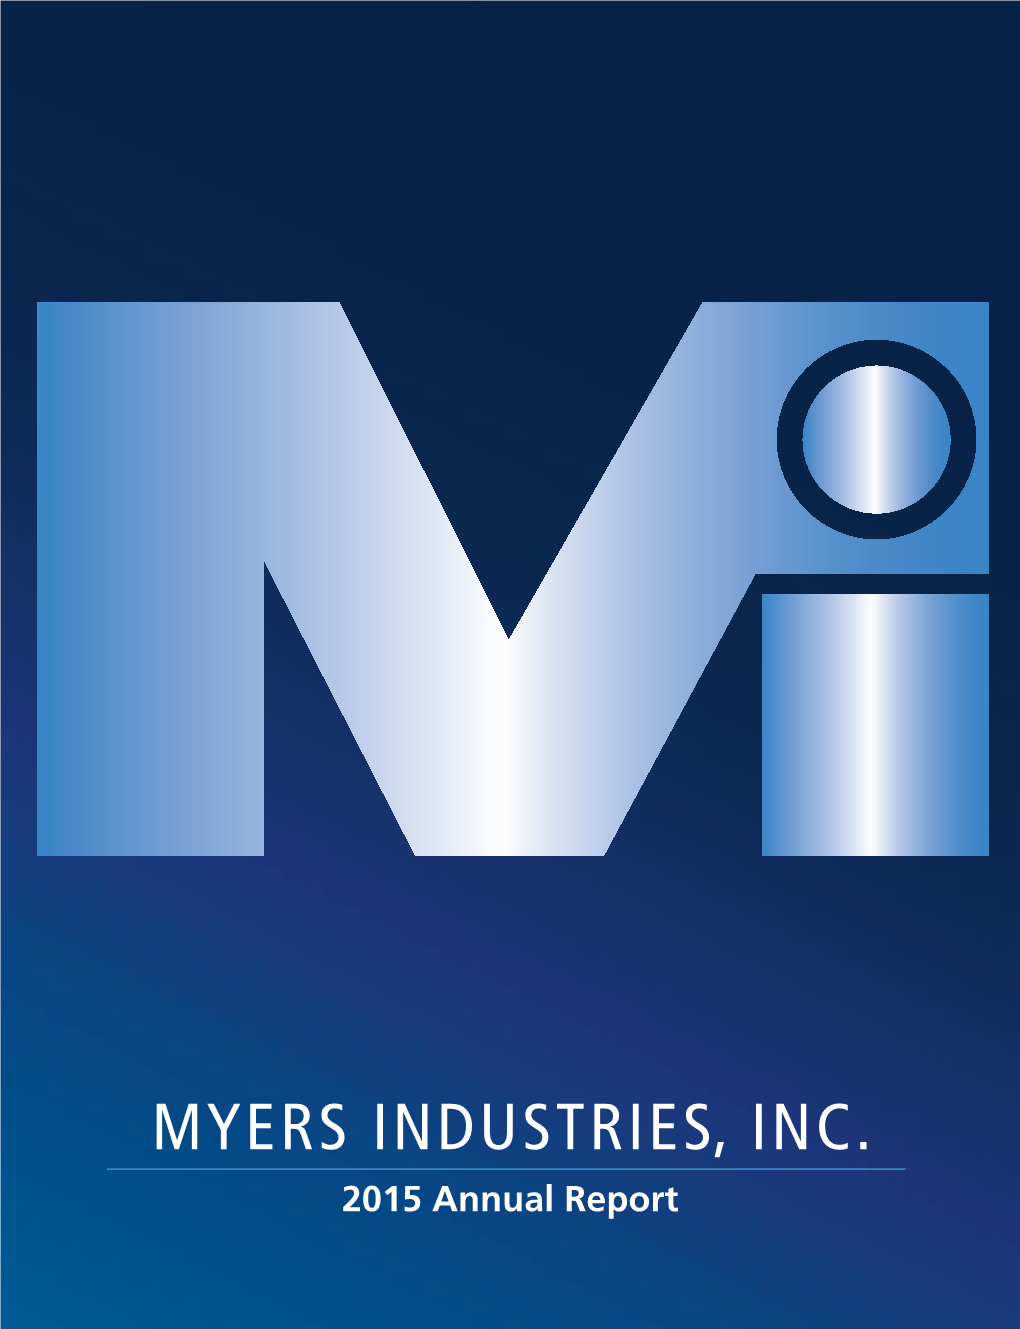 MYERS INDUSTRIES, INC. 2015 Annual Report